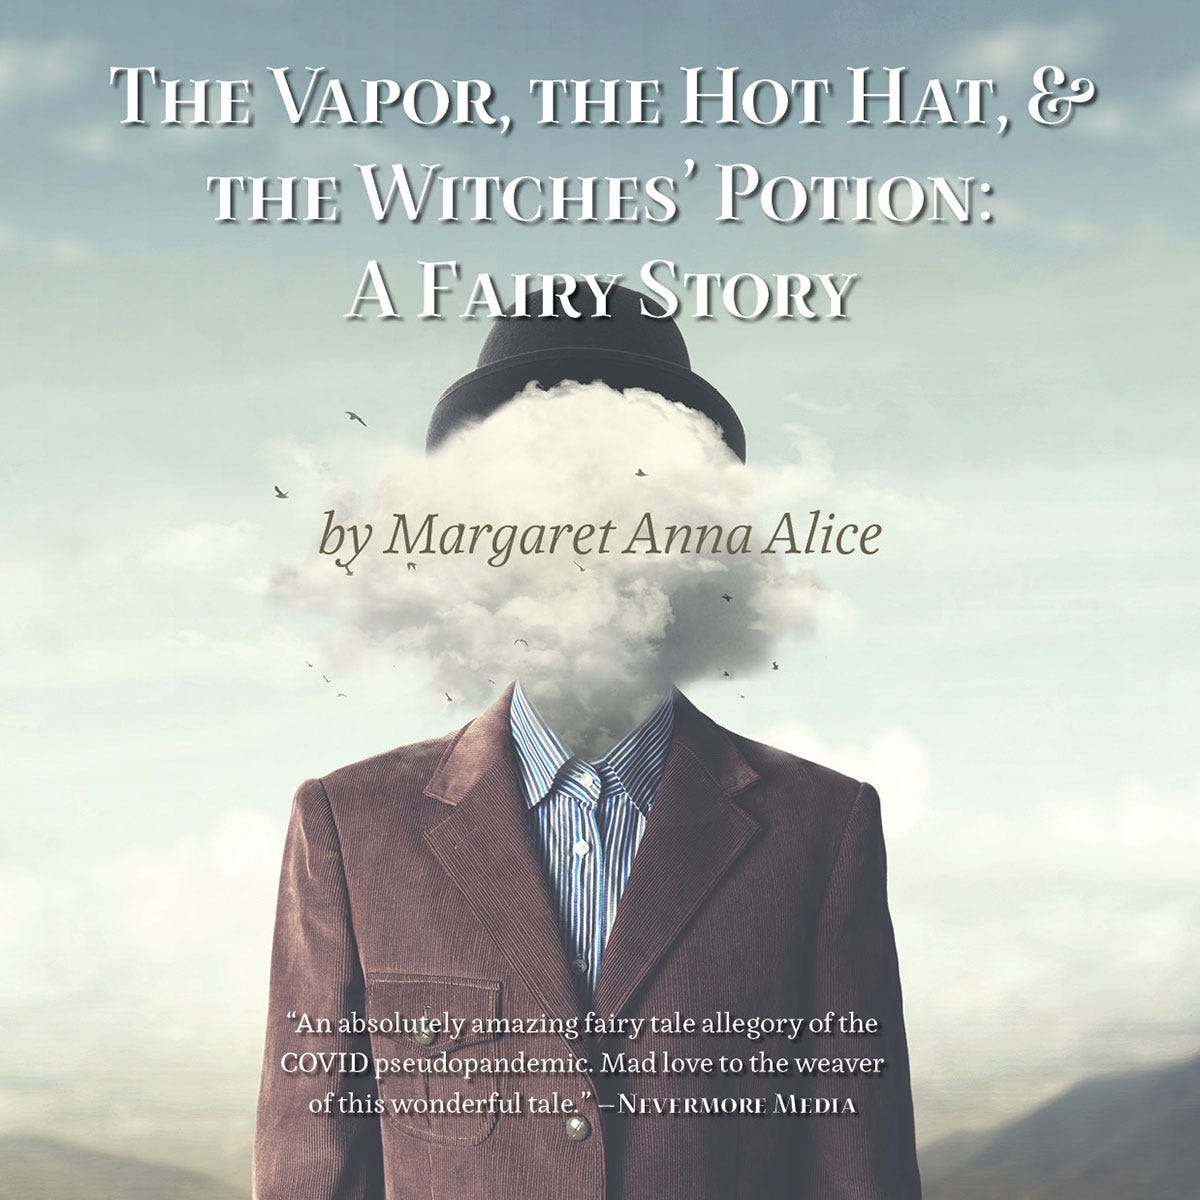 The Vapor, the Hot Hat, and the Witches' Potion: A Fairy Story (Book Cover)